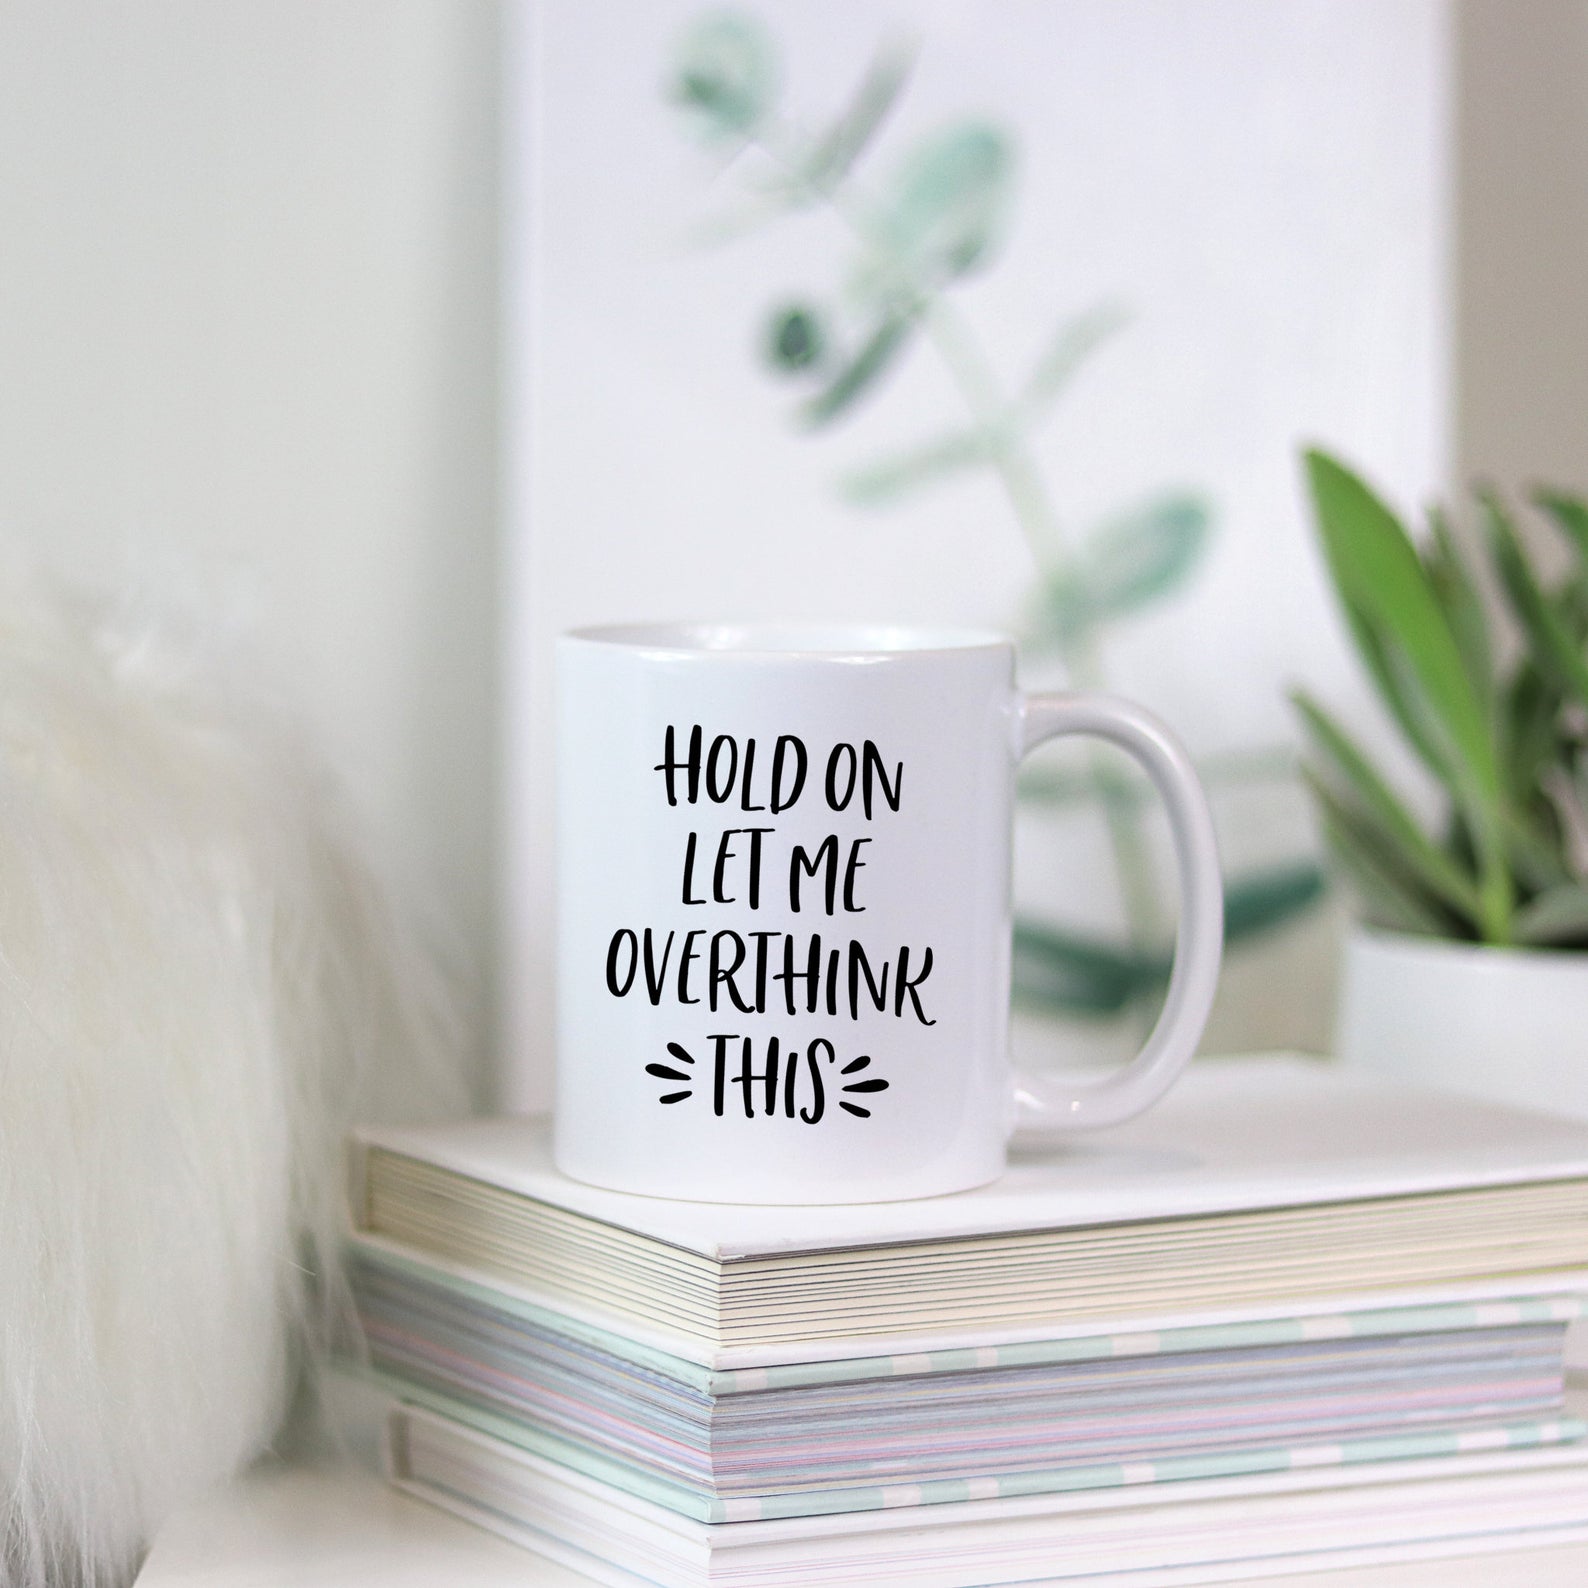 "Hold on let me overthink this" funny coffee mug from Happy Kiss Co. 